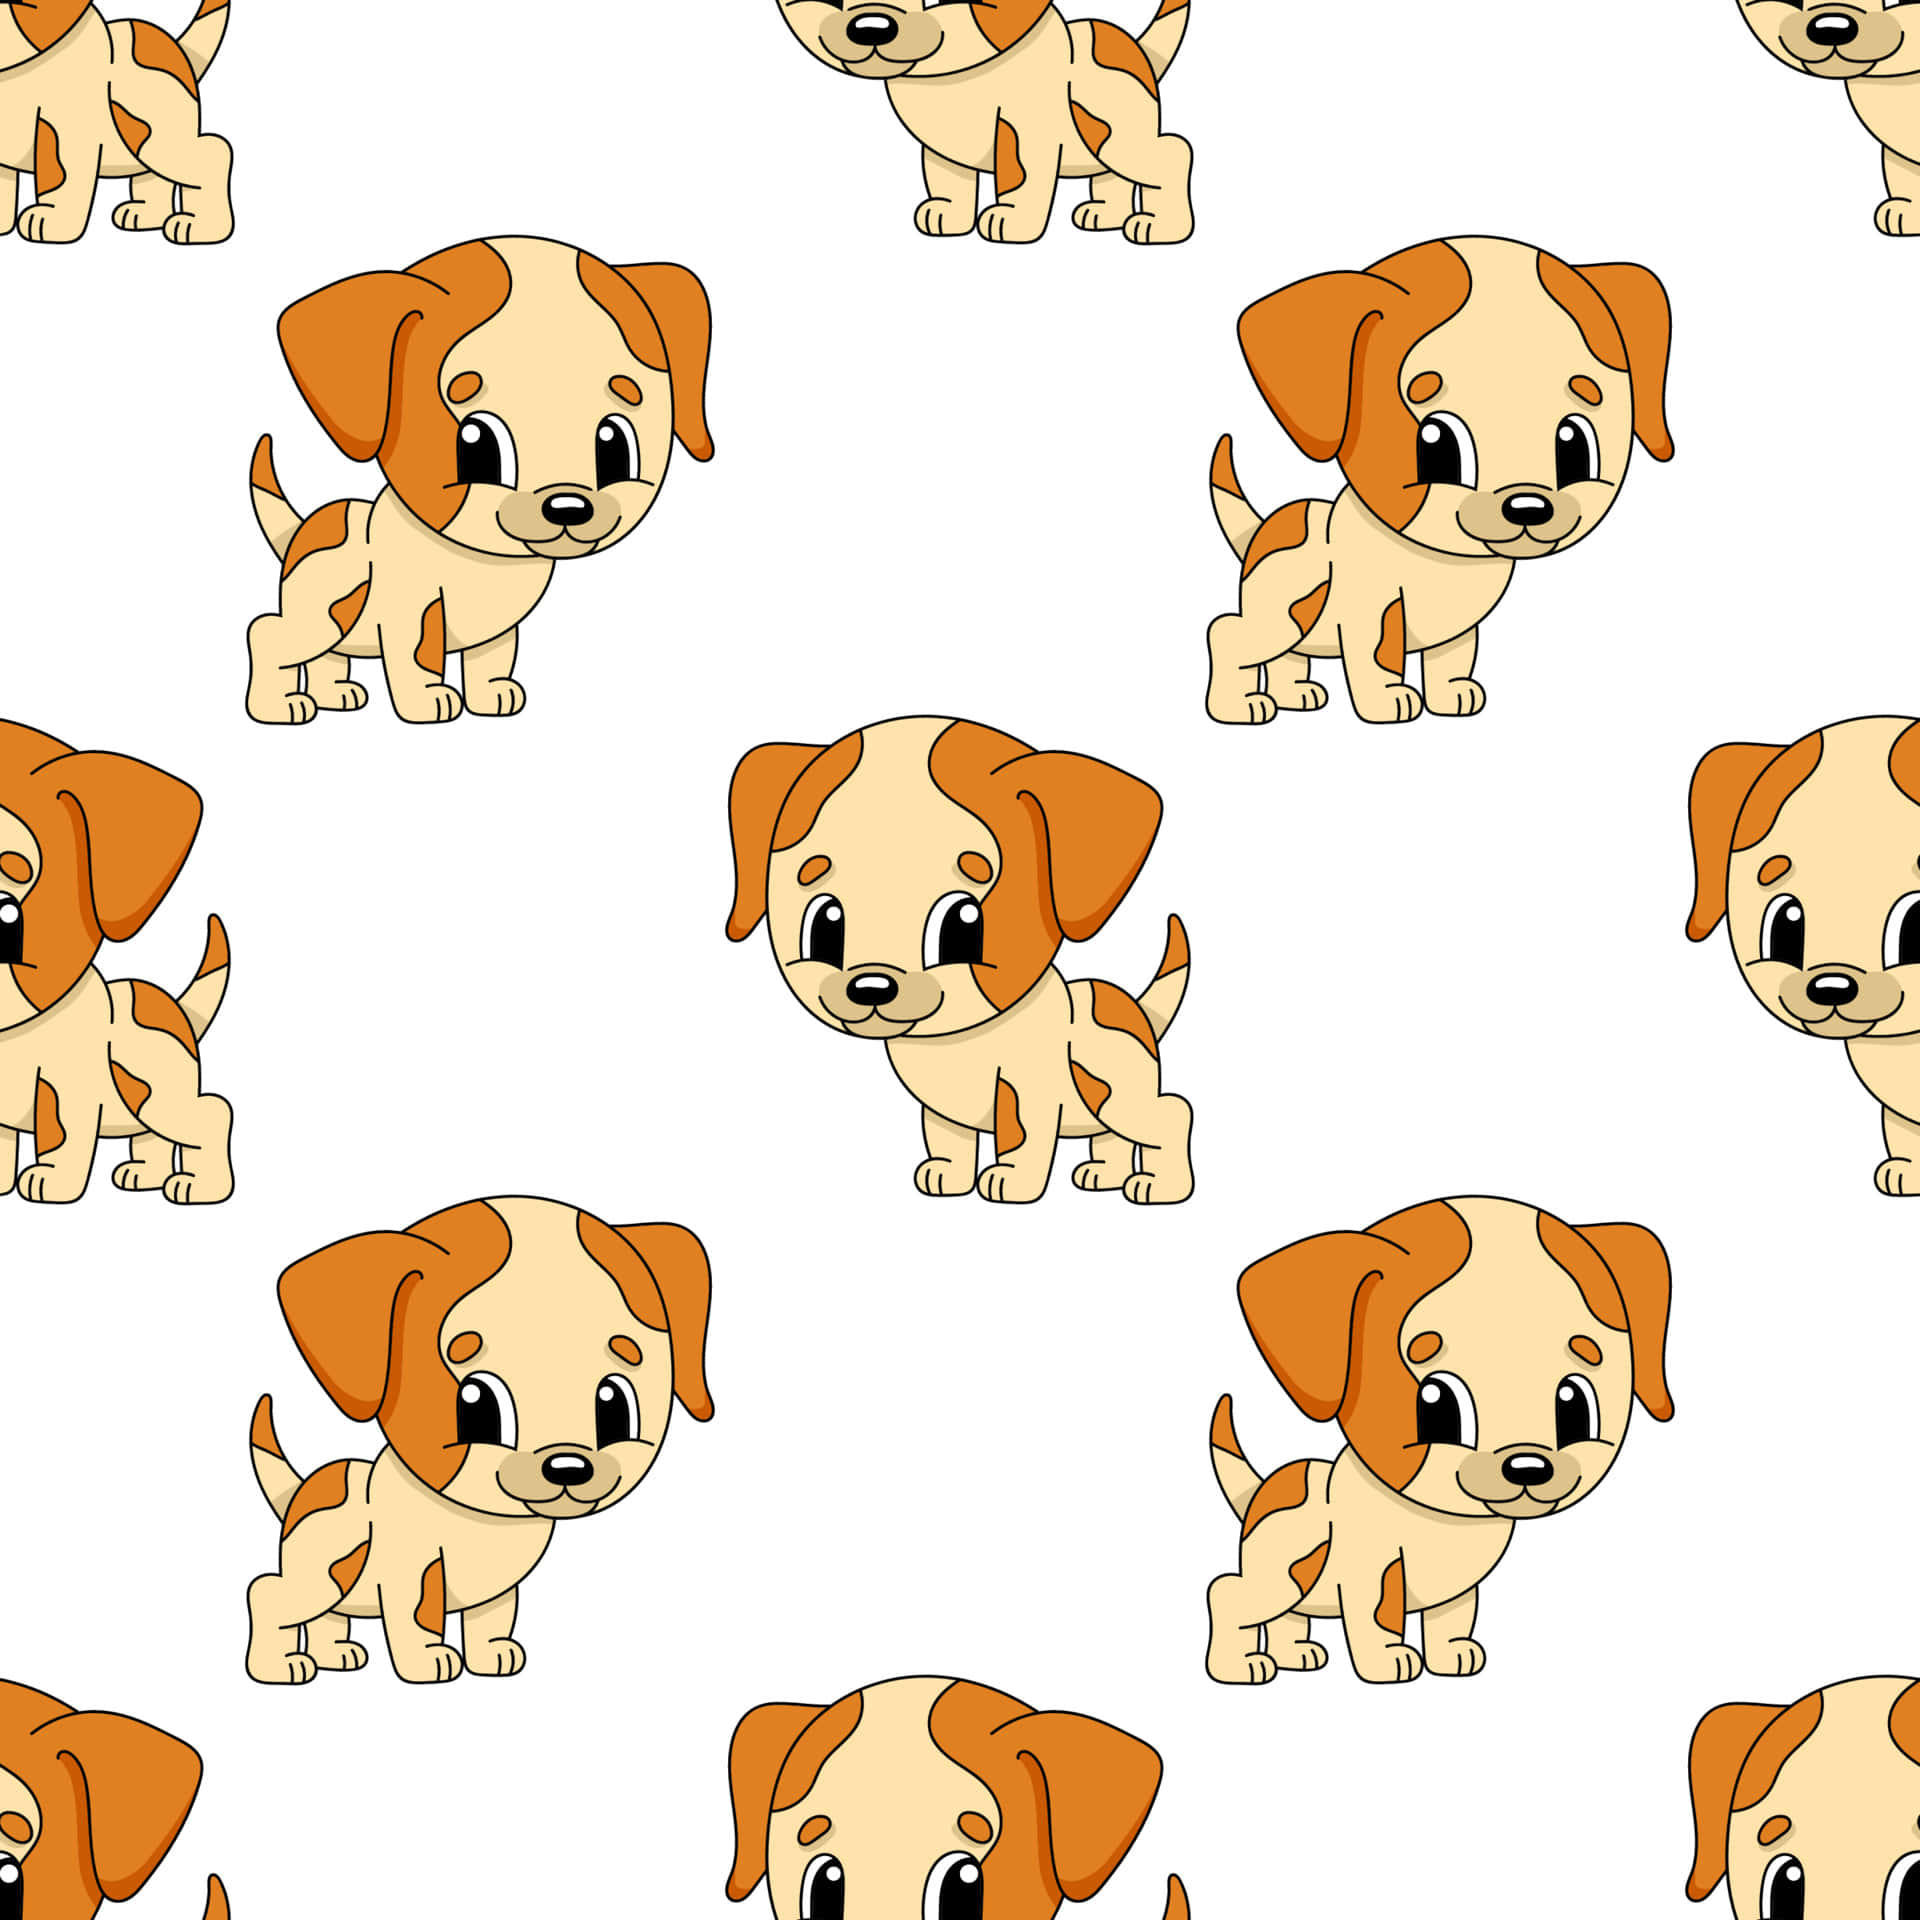 A happy cartoon dog with its tongue out enjoying life Wallpaper